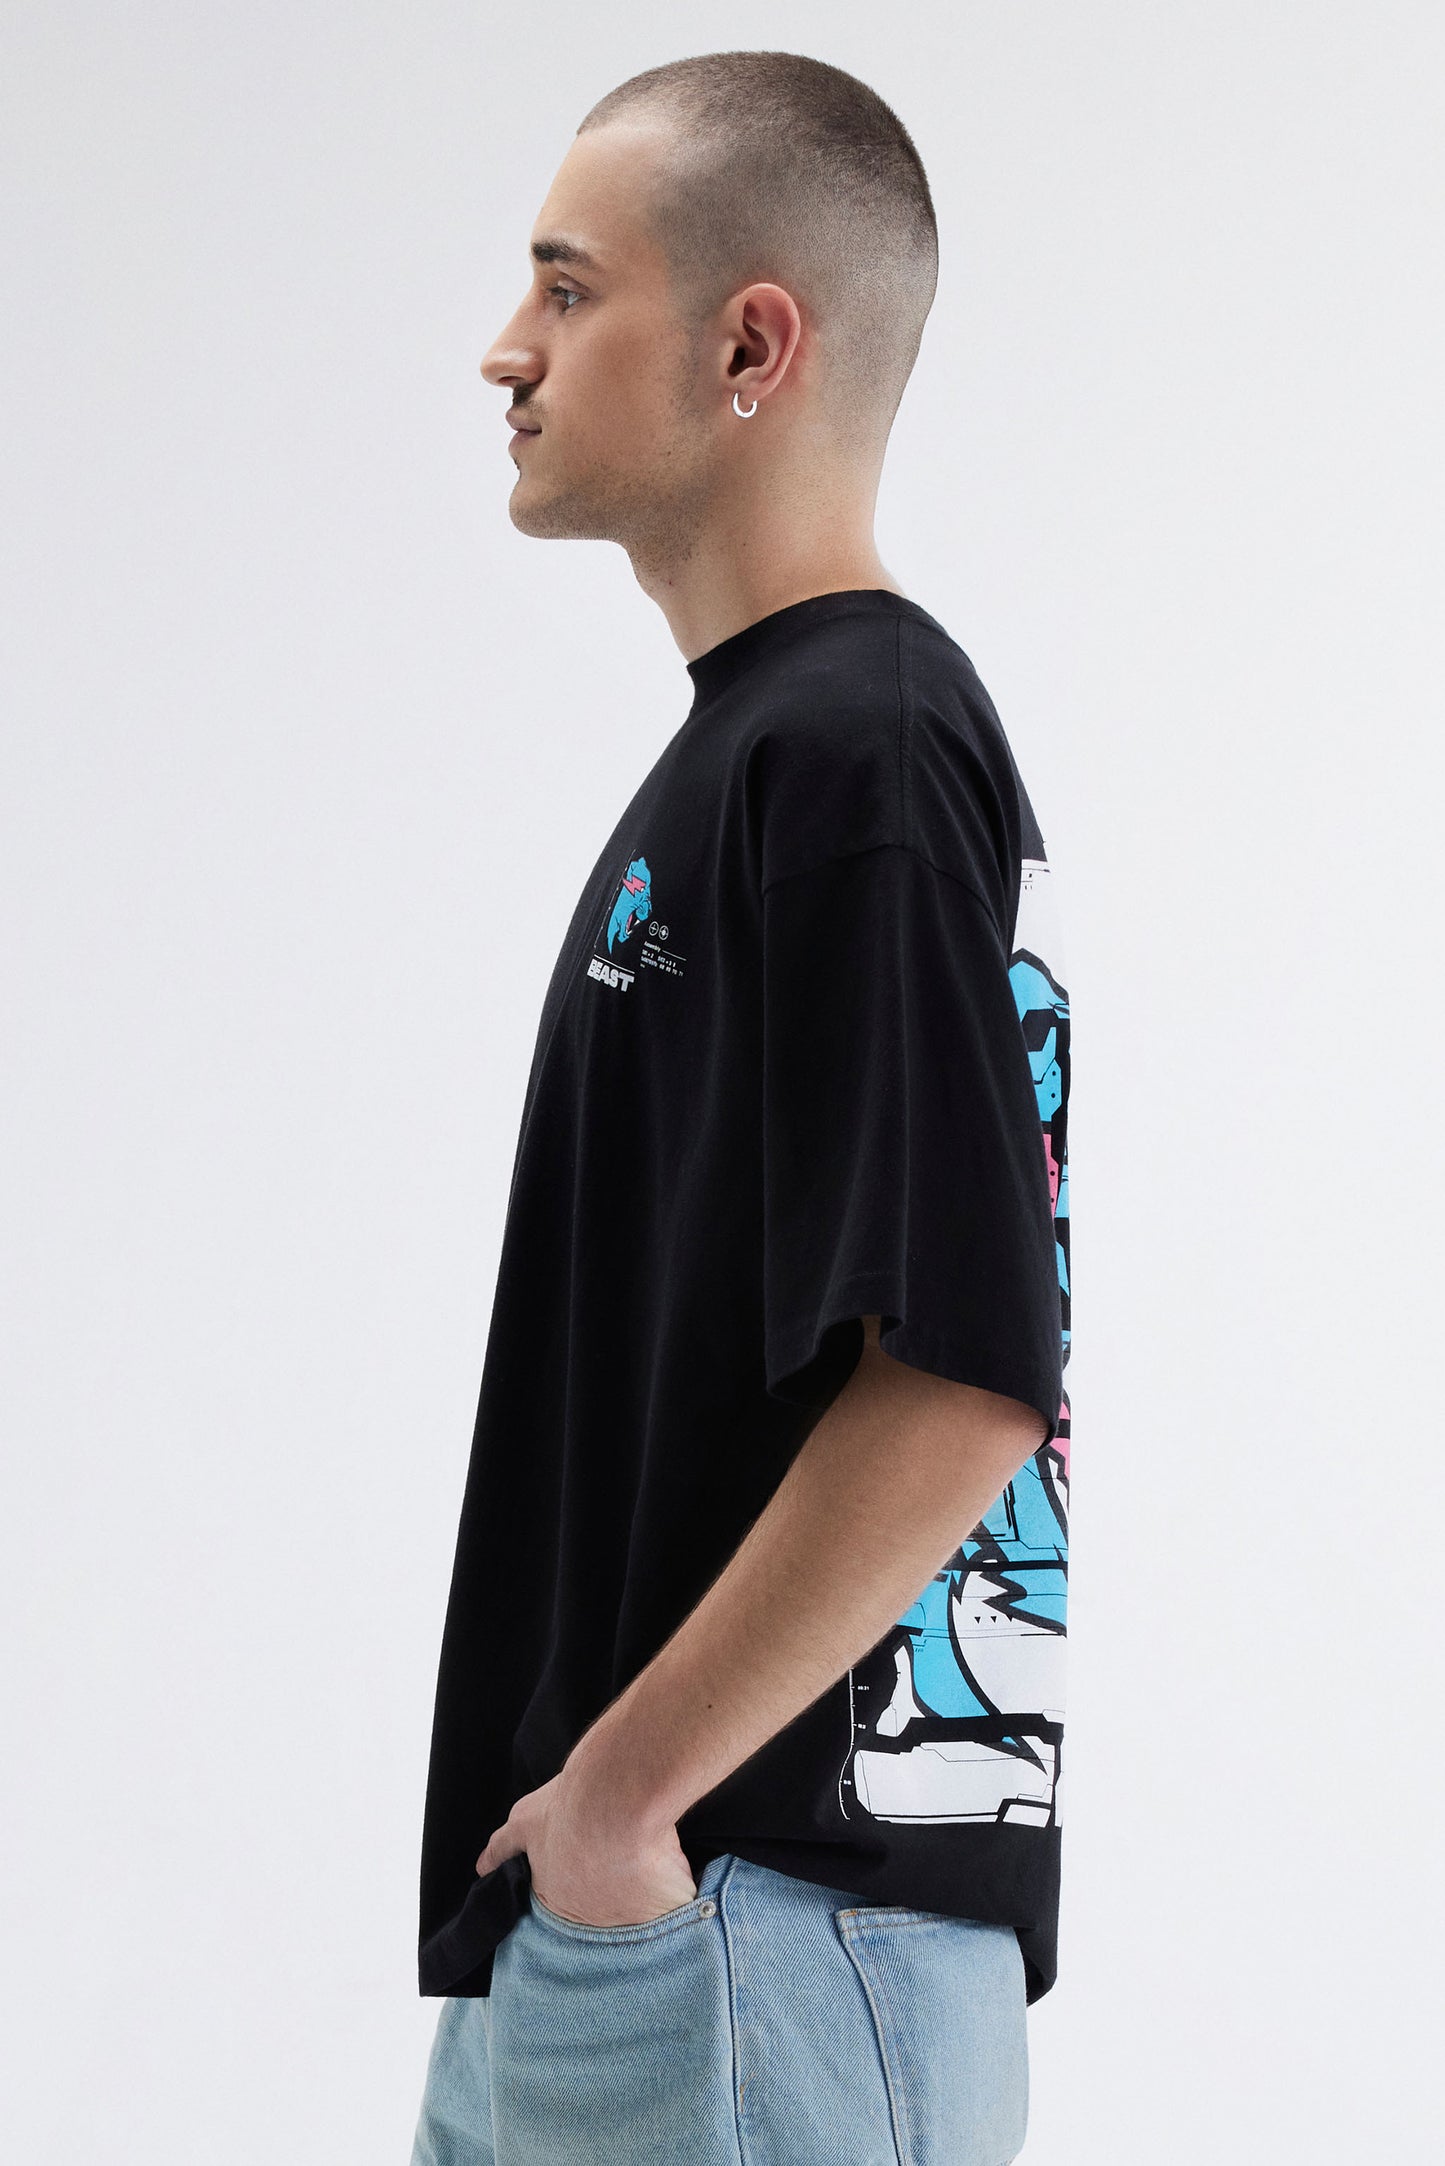 BEAST PARTICLE SS TEE - BLACK